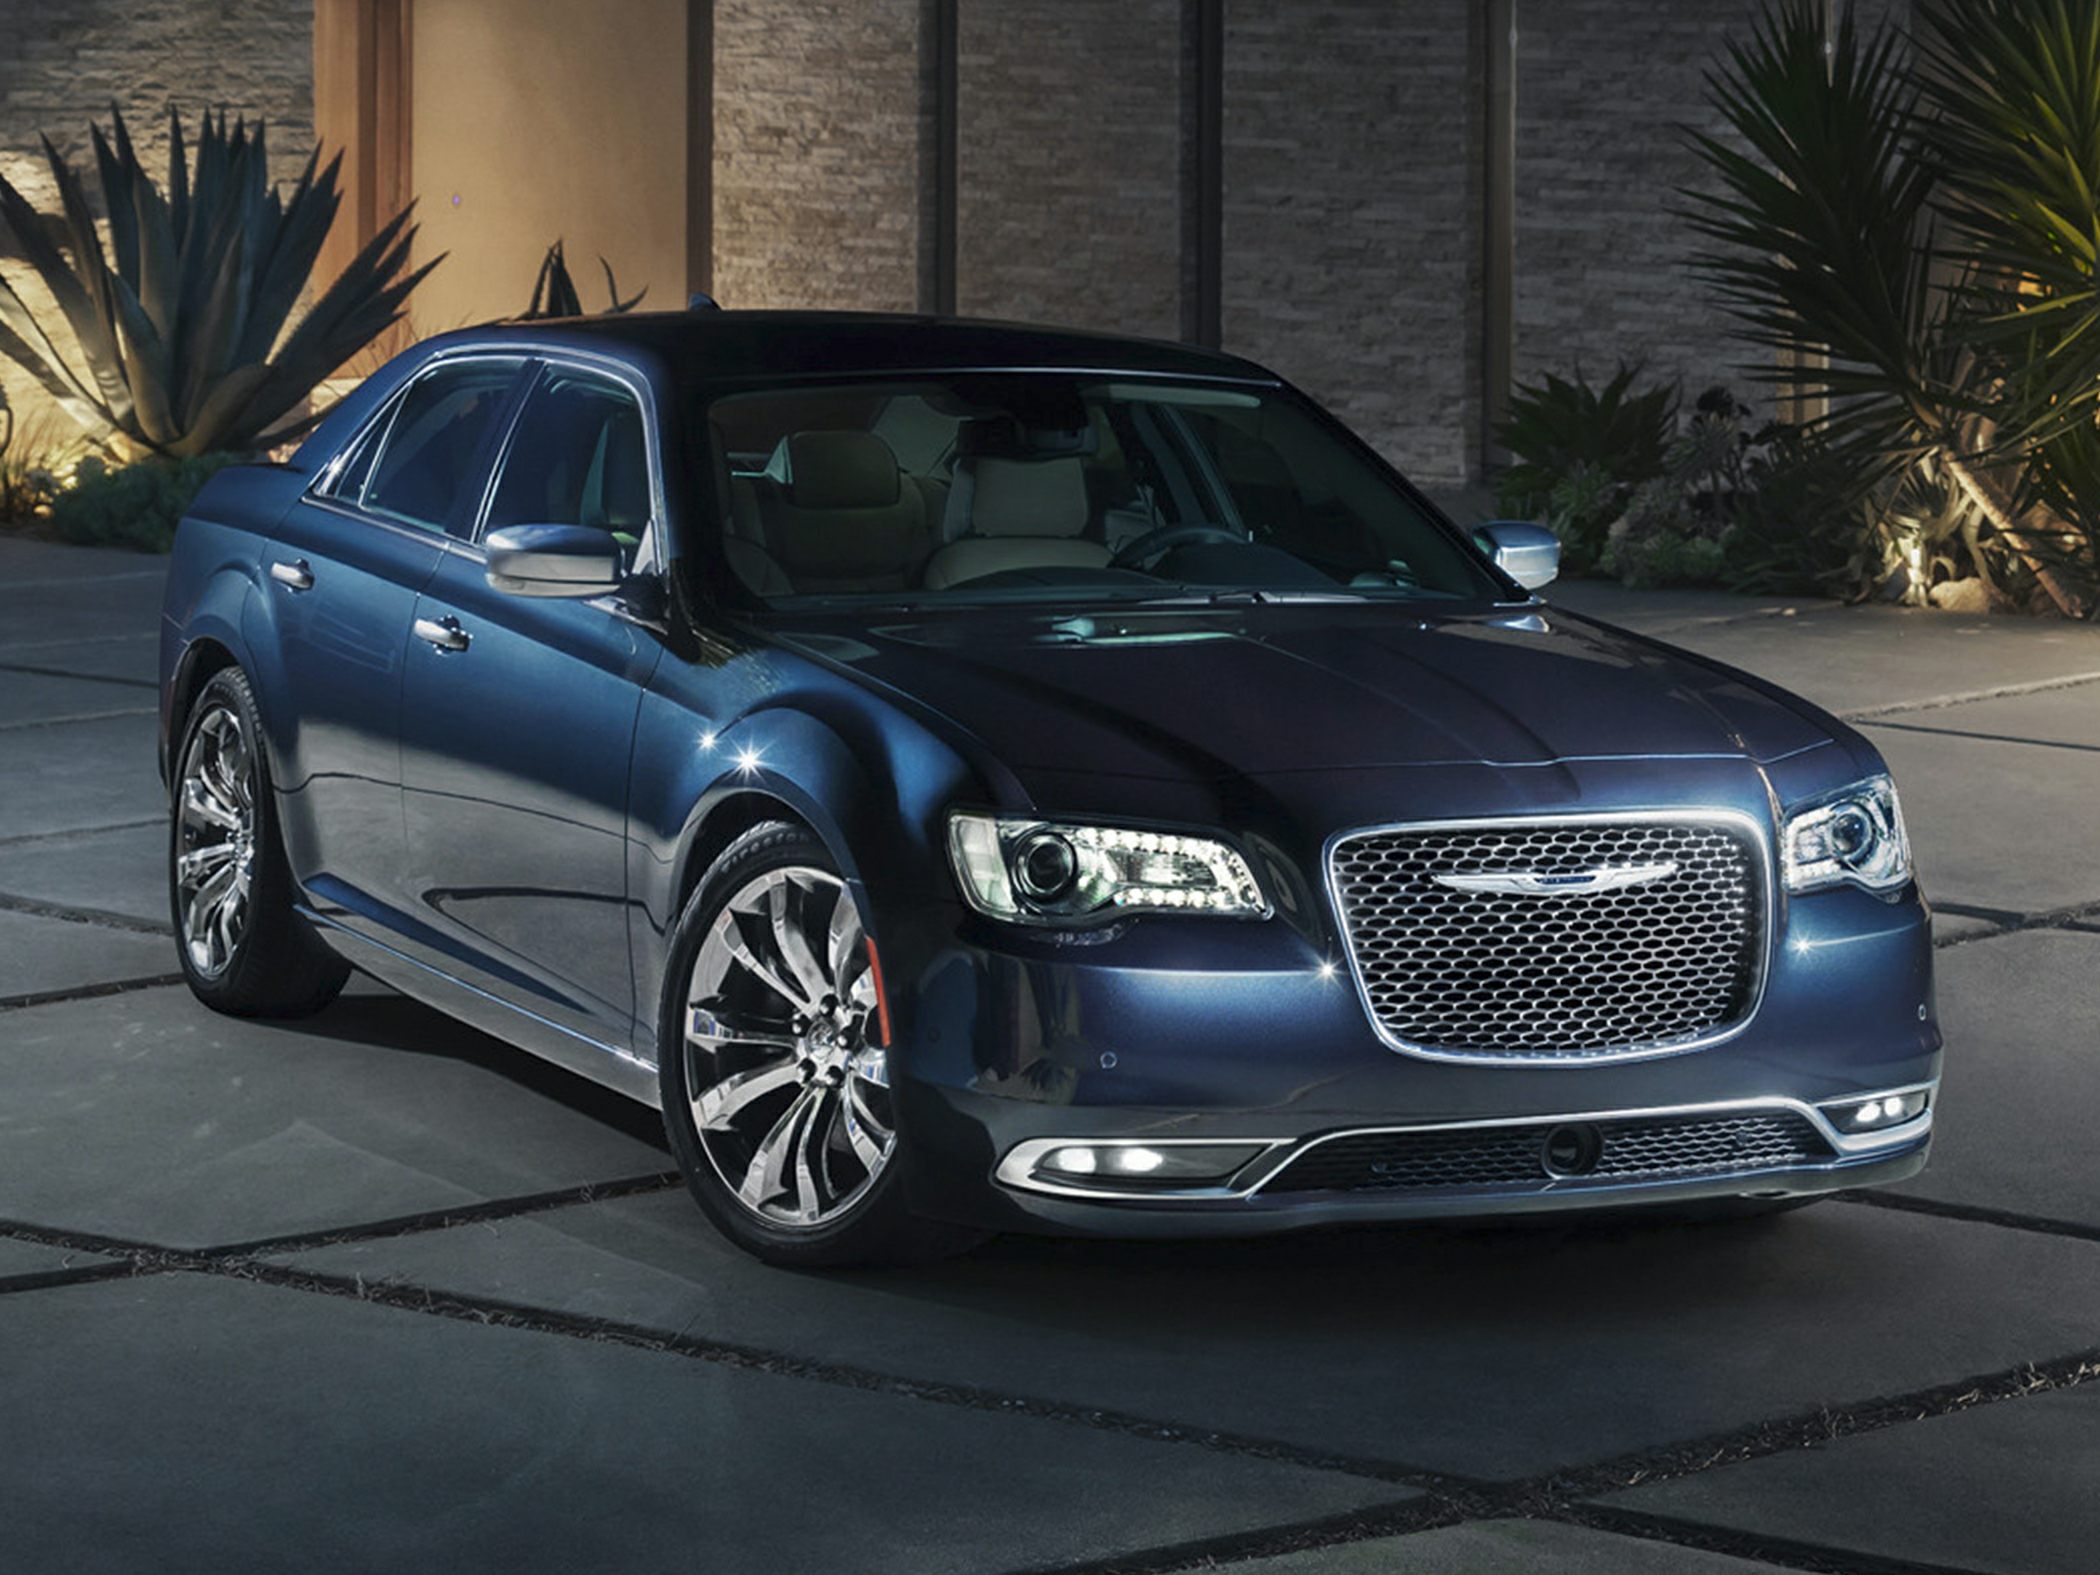 2018 Chrysler 300 Deals, Prices, Incentives & Leases